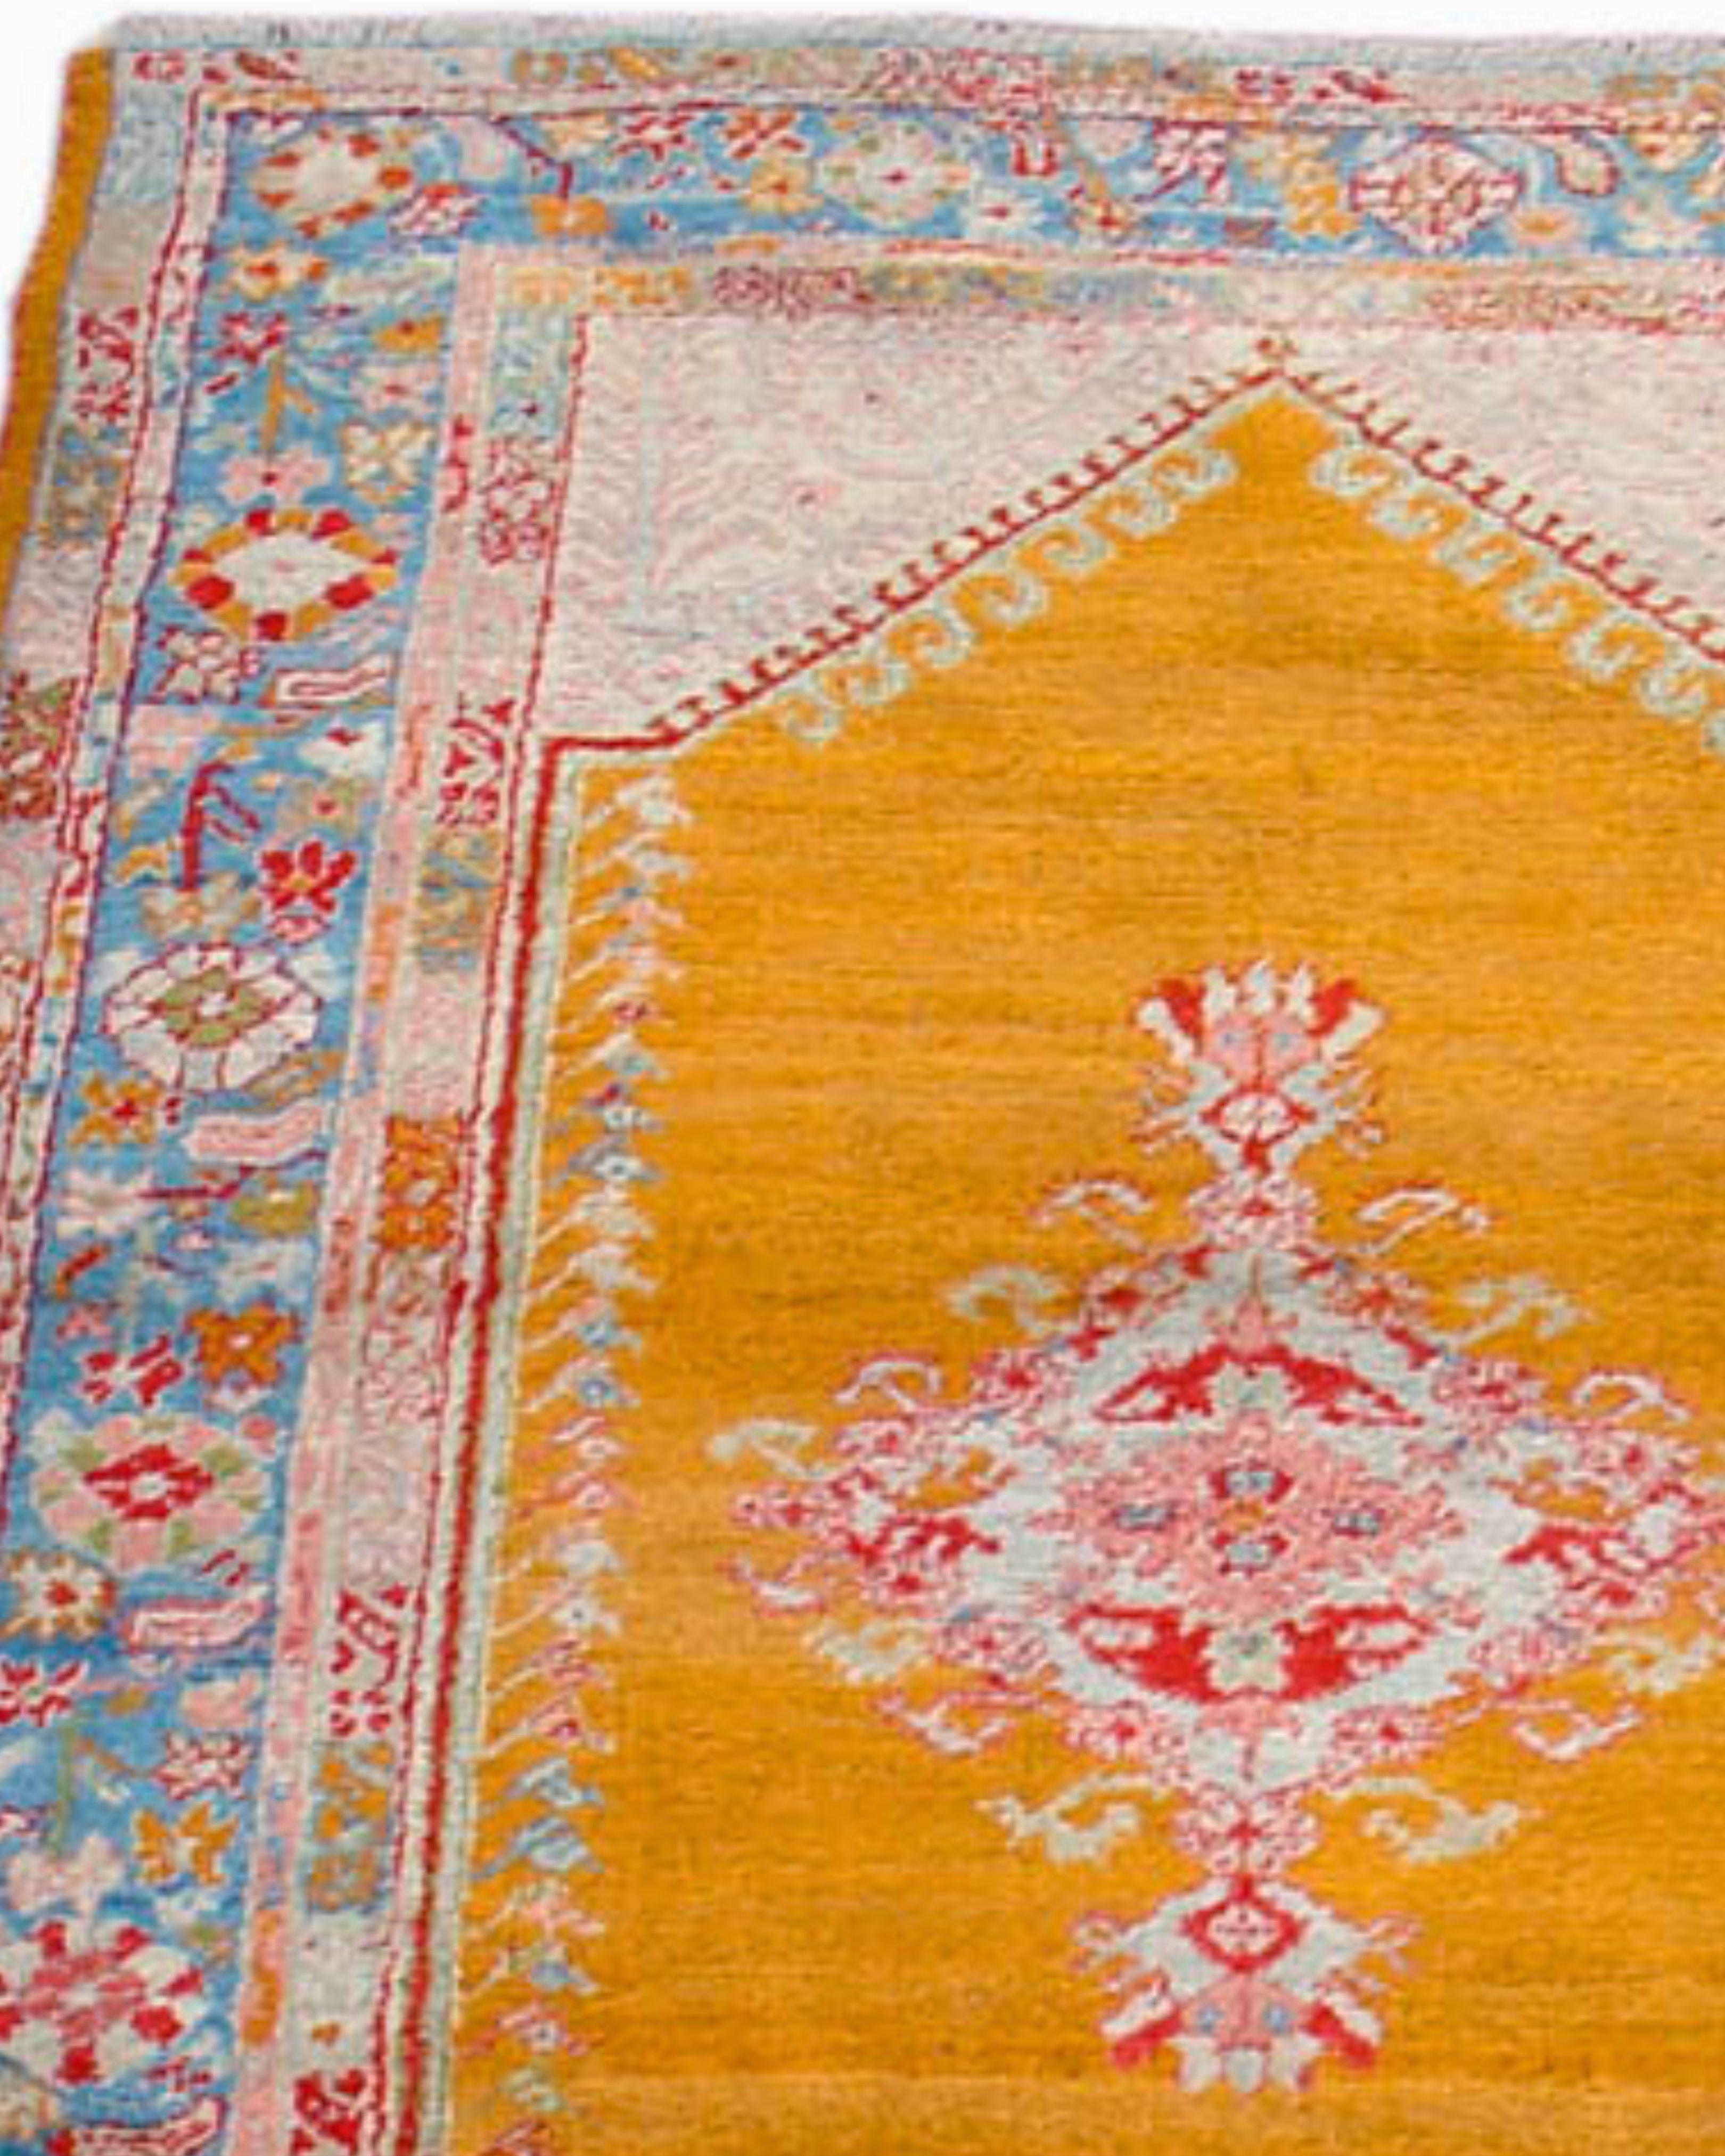 Antique Angora Oushak Rug with Saffron Yellow Field, Late 19th Century In Excellent Condition For Sale In San Francisco, CA